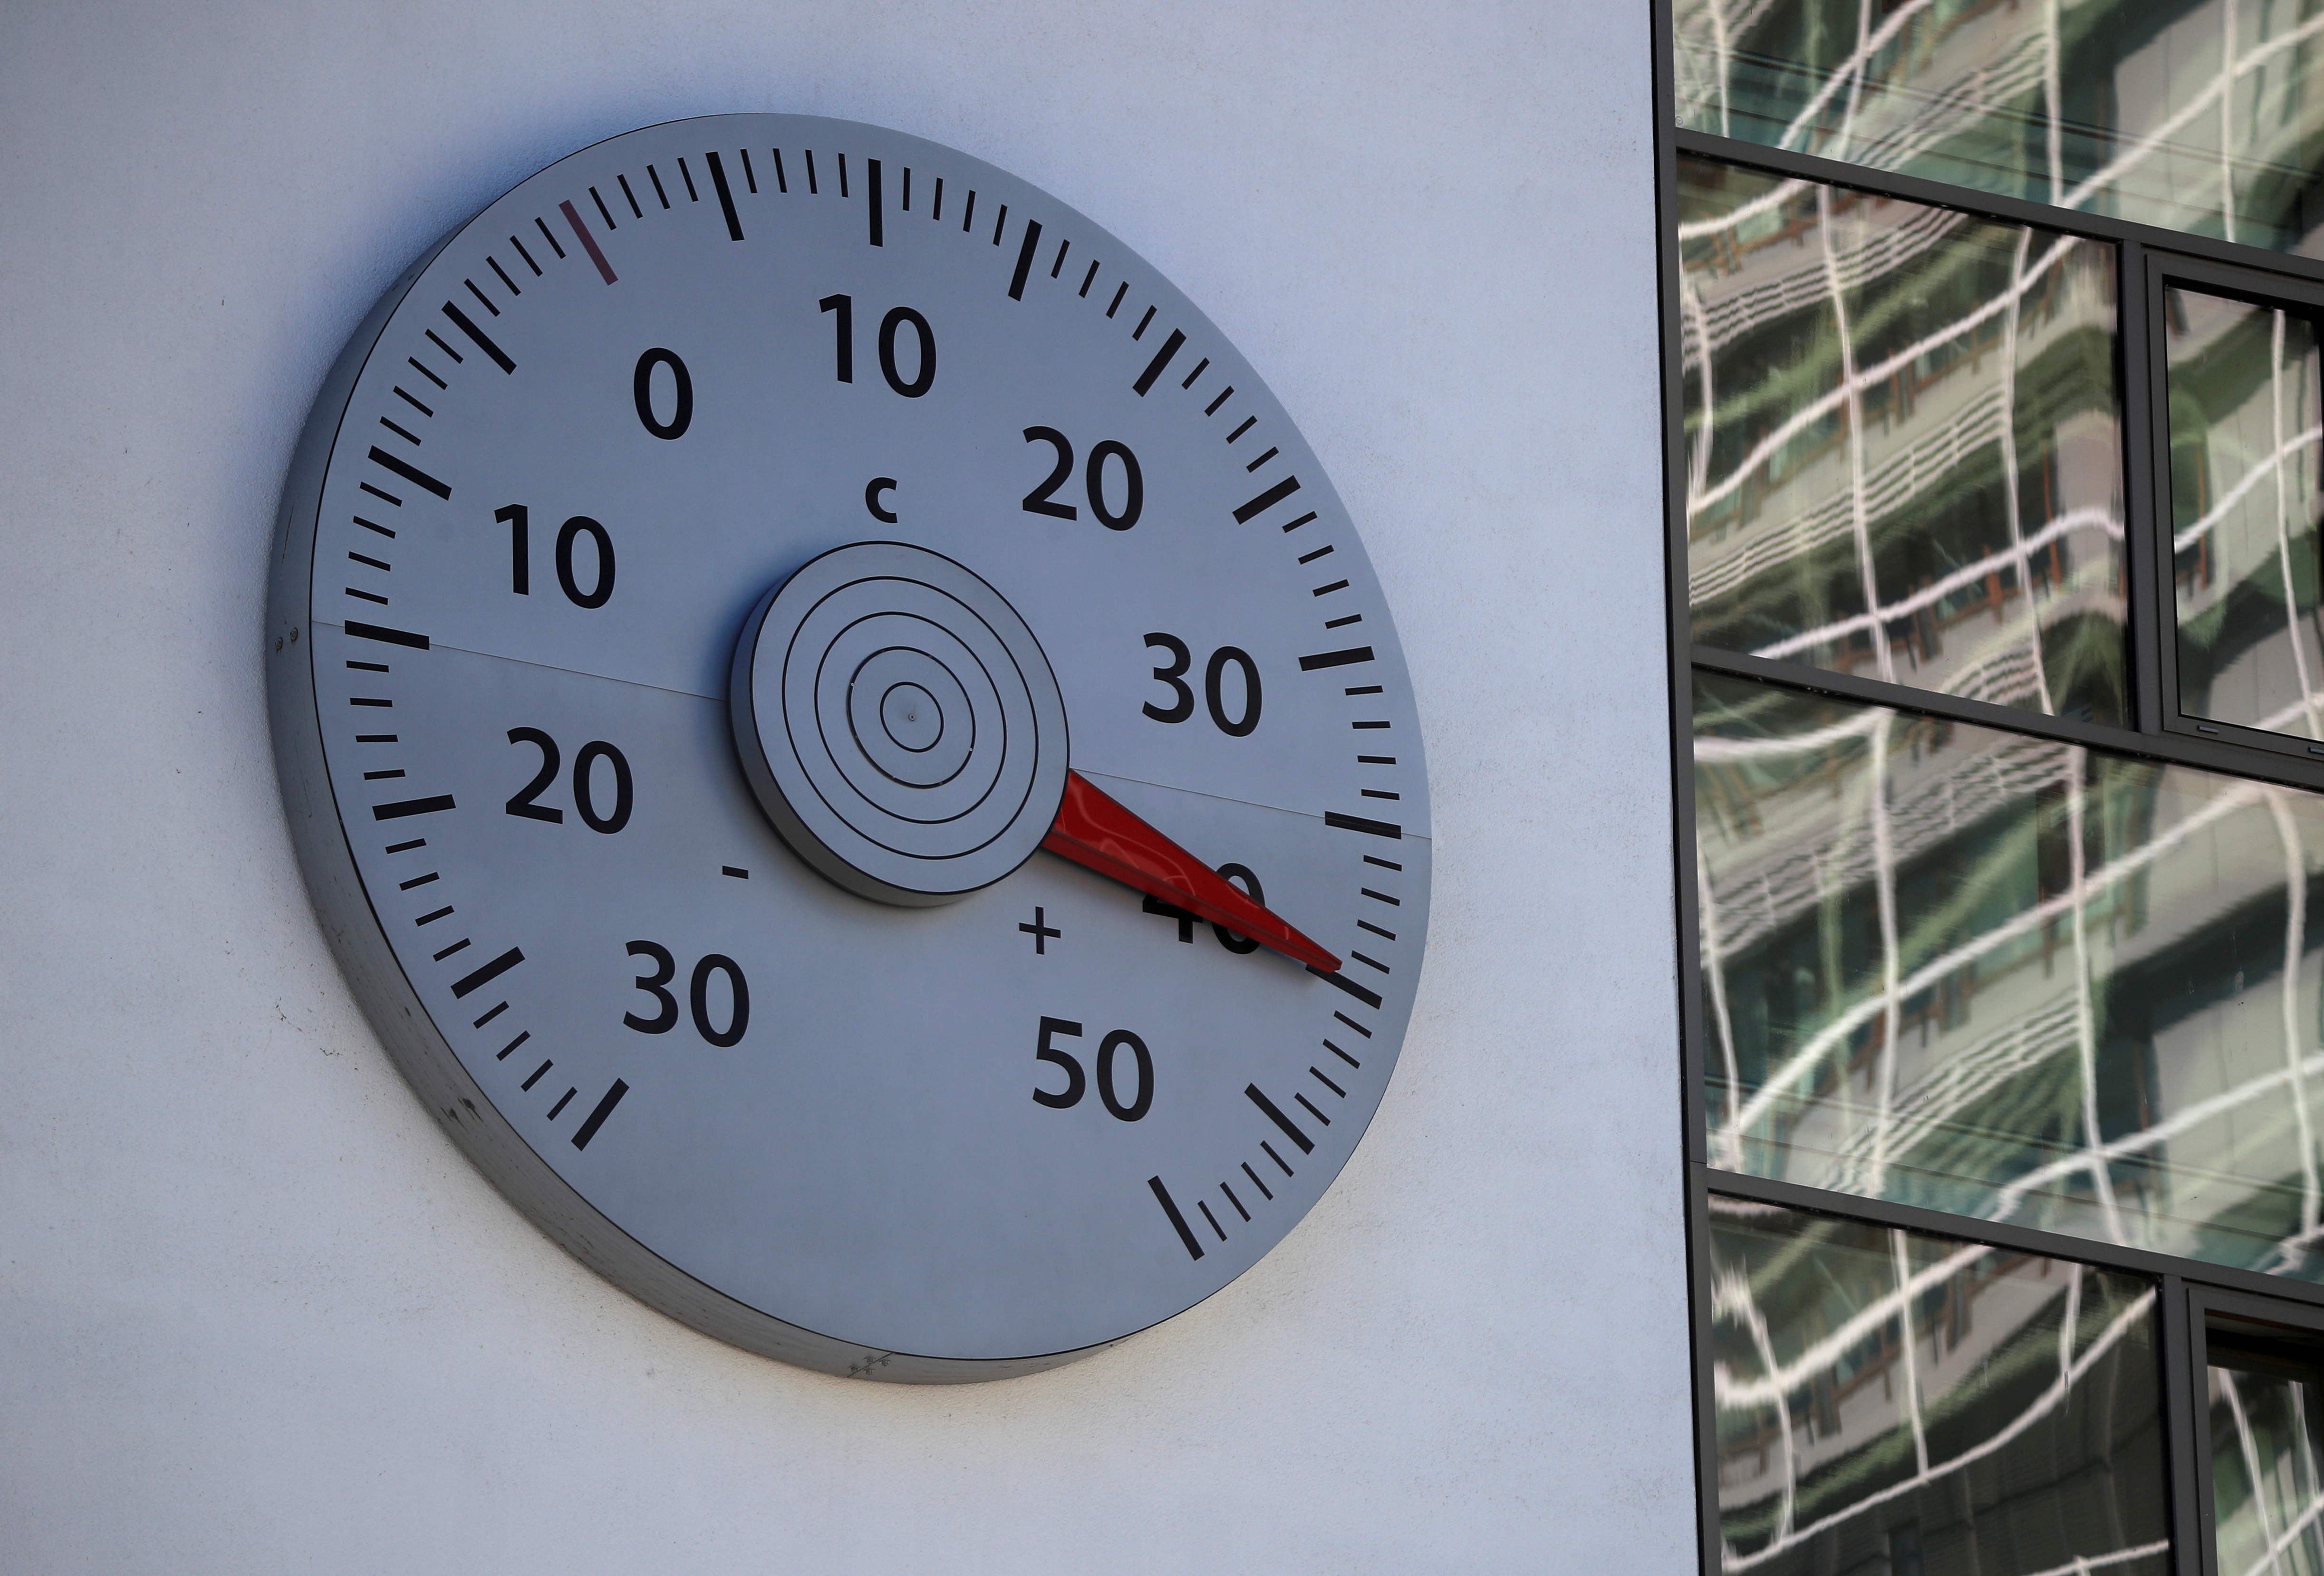 A thermometer mounted on a wall of the headquarters of the United Nations Framework Convention on Climate Change (UNFCCC) shows a temperature of 40 Celsius degrees in Bonn